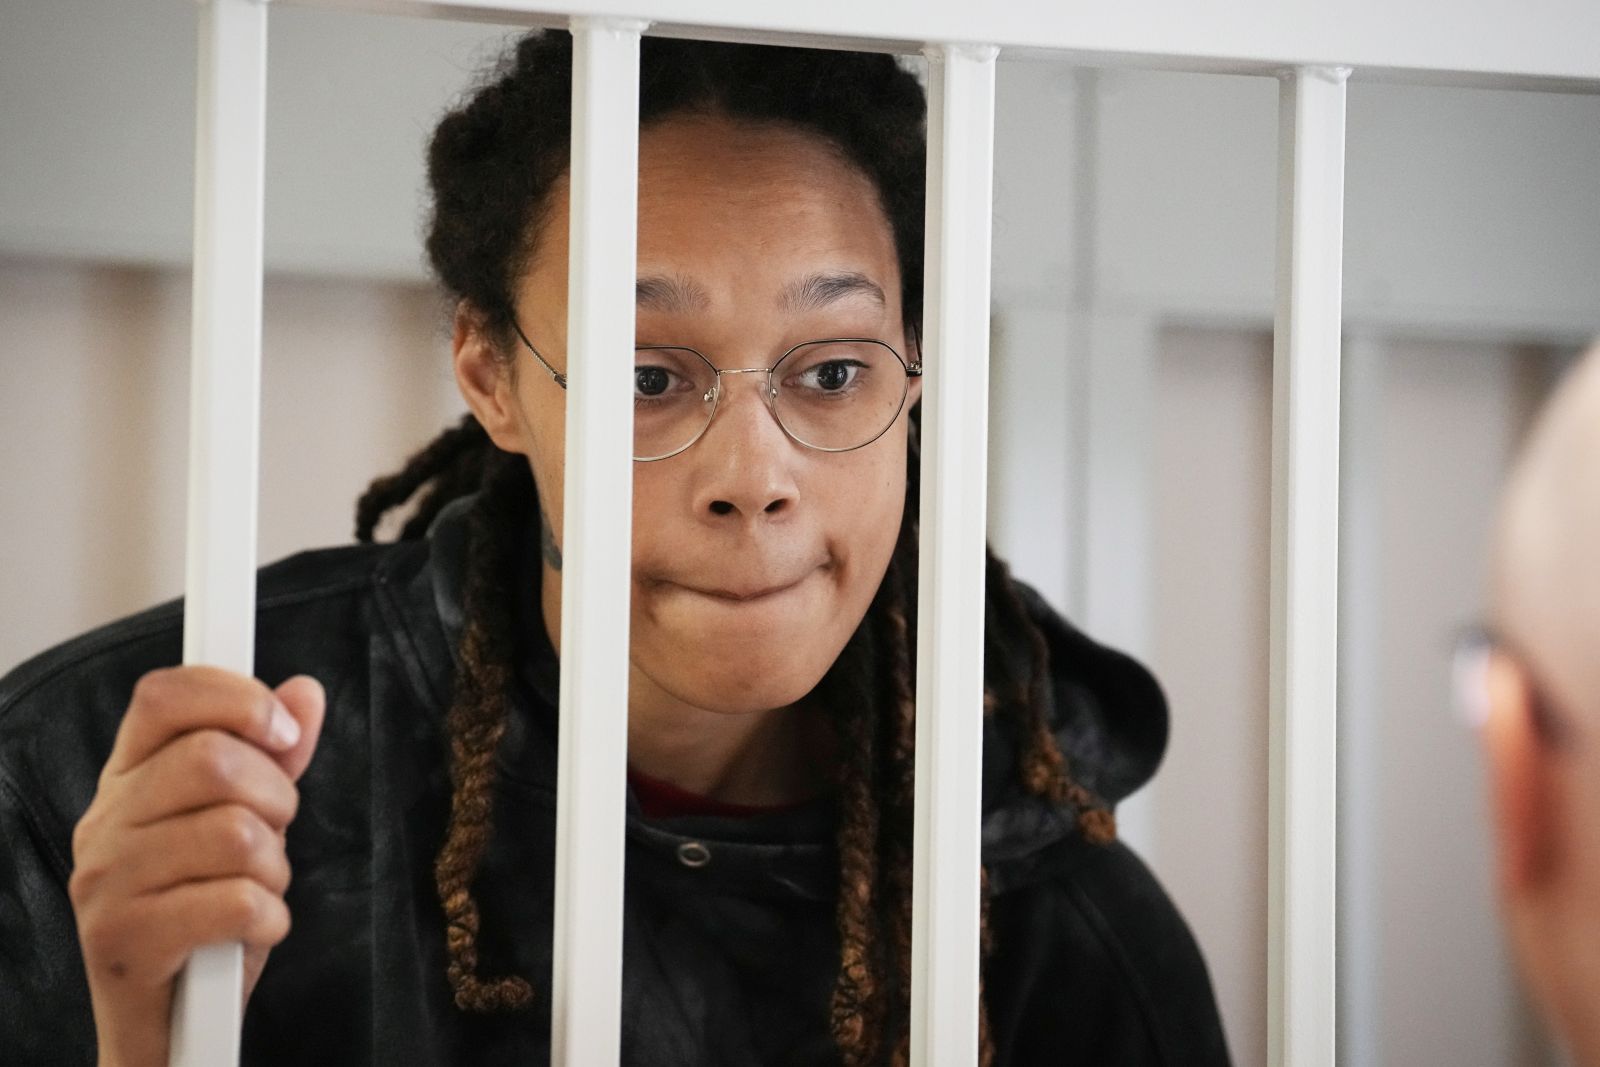 epa10091923 WNBA star and two-time Olympic gold medalist Brittney Griner stands in a cage at a court room prior to a hearing in Khimki City Court outside Moscow, Russia, 26 July 2022.  Griner, a World Champion player of the WNBA's Phoenix Mercury team was arrested in February at Moscow's Sheremetyevo Airport after some hash oil was detected and found in her luggage, for which she now could face a prison sentence of up to ten years.  EPA/ALEXANDER ZEMLIANICHENKO / POOL